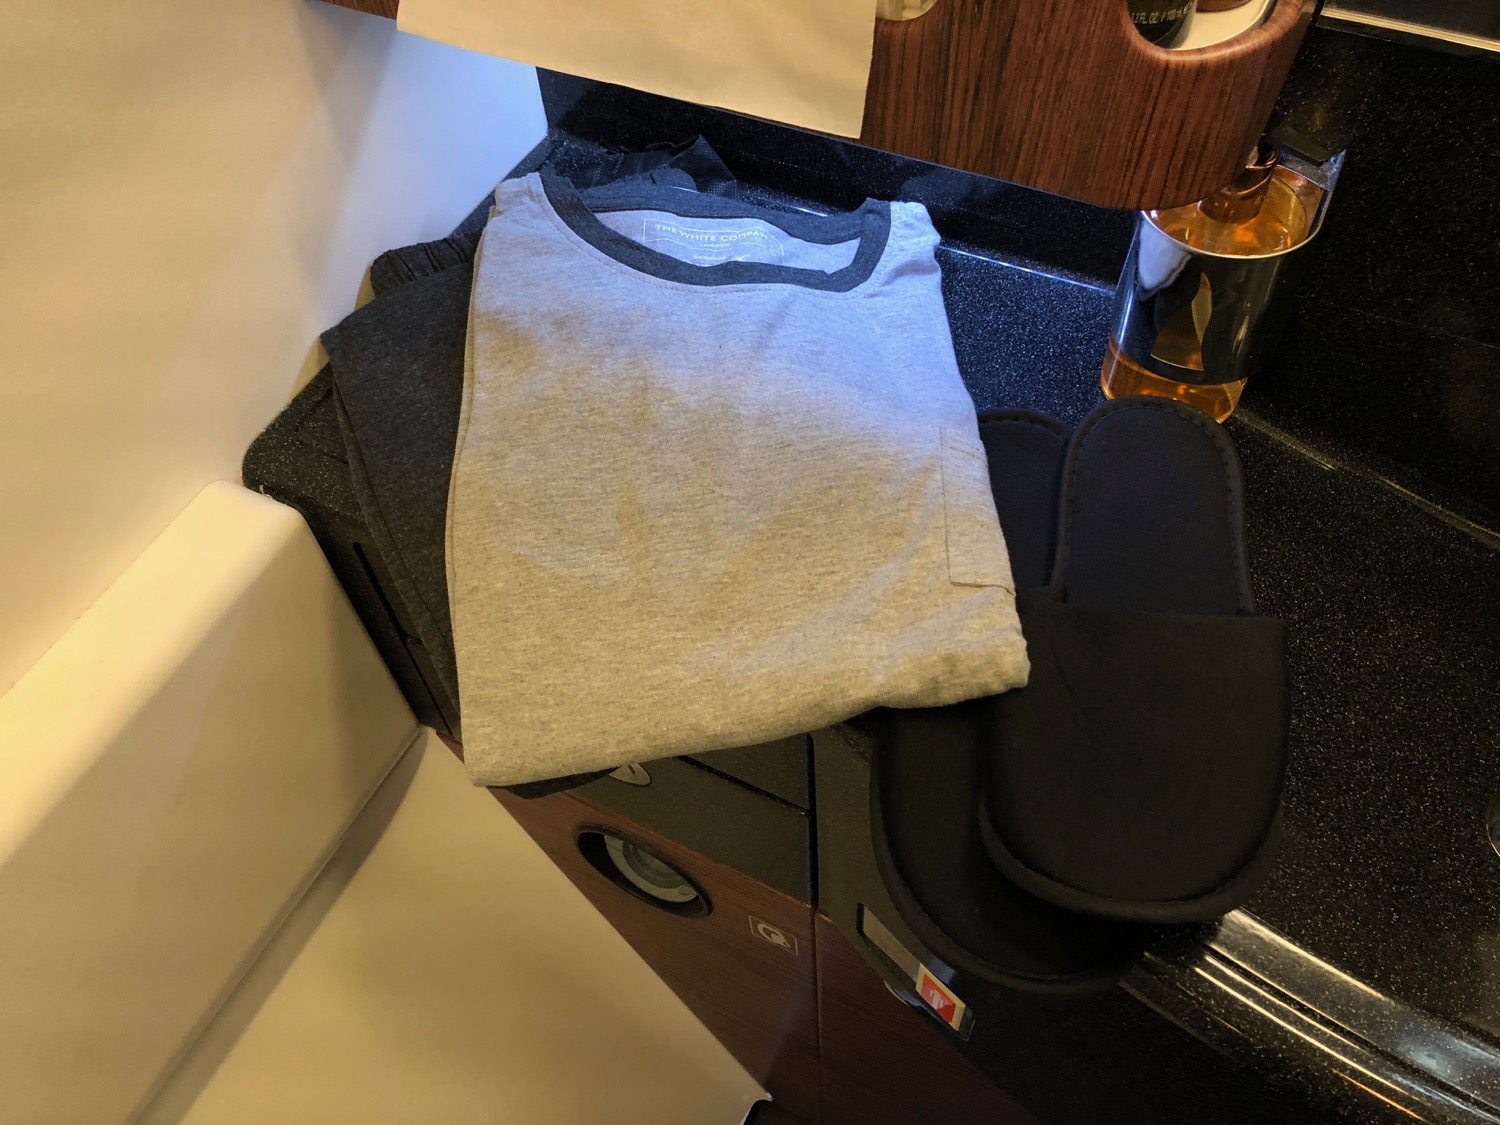 a grey shirt and slippers on a counter